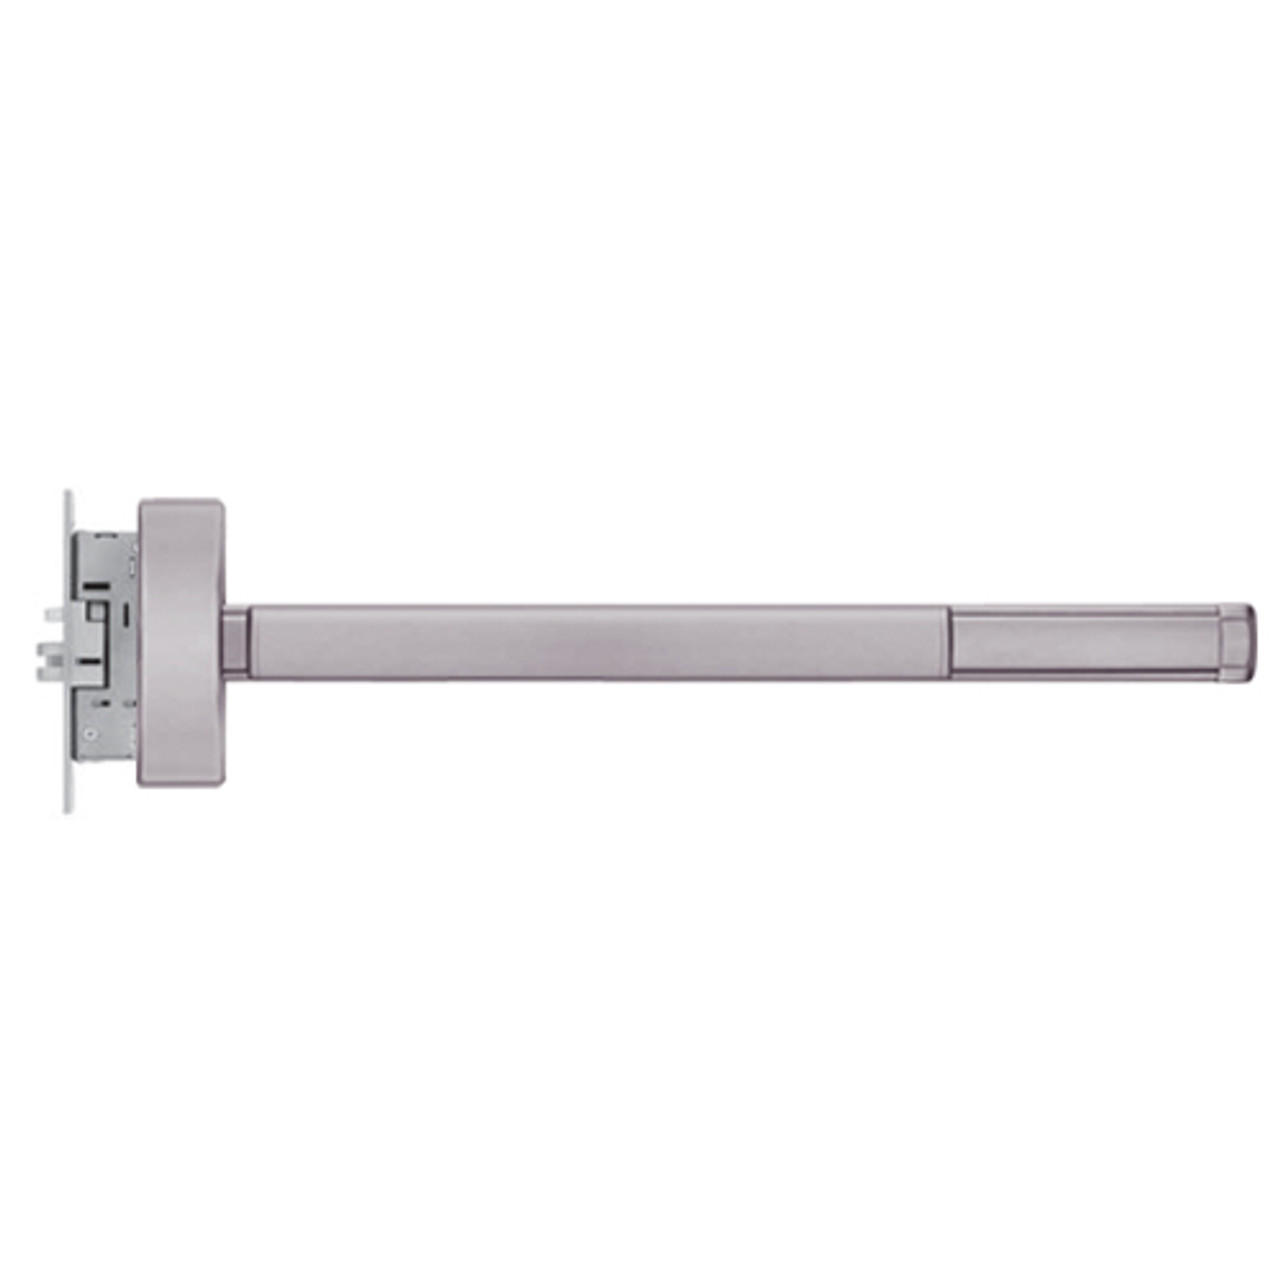 DE2303-RHR-630-36 PHI 2300 Series Apex Mortise Exit Device with Delayed Egress Prepped for Key Retracts Latchbolt in Satin Stainless Steel Finish